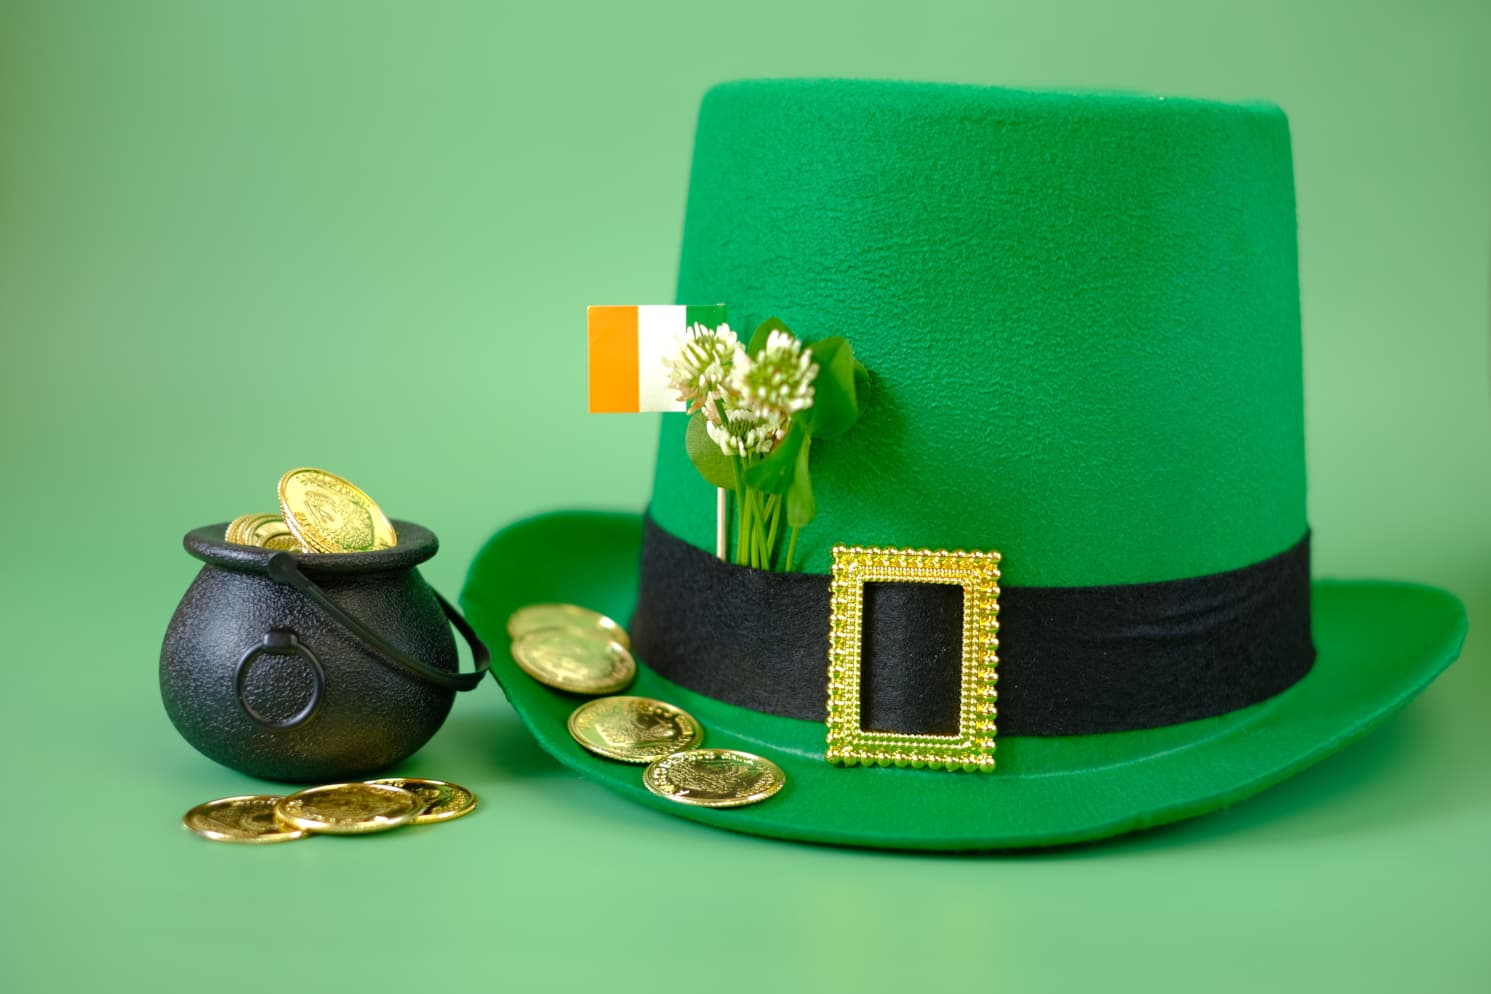 A green leprechaun hat with blooming clovers and an Irish flag in its band, next to a miniature pot of gold